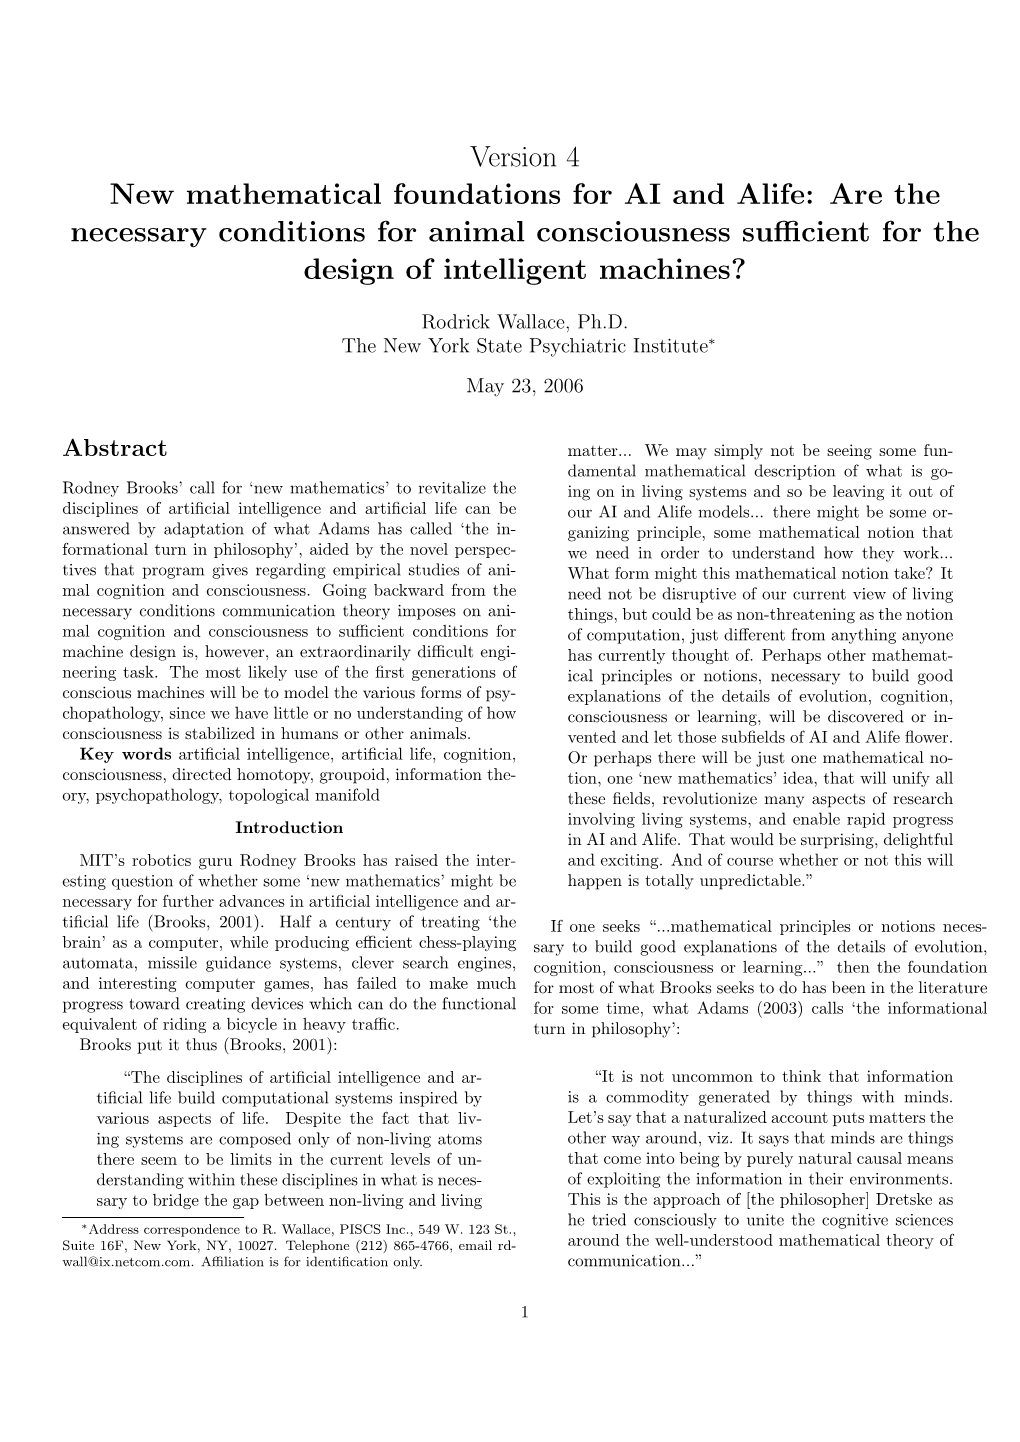 Version 4 New Mathematical Foundations for AI and Alife: Are the Necessary Conditions for Animal Consciousness Suﬃcient for the Design of Intelligent Machines?